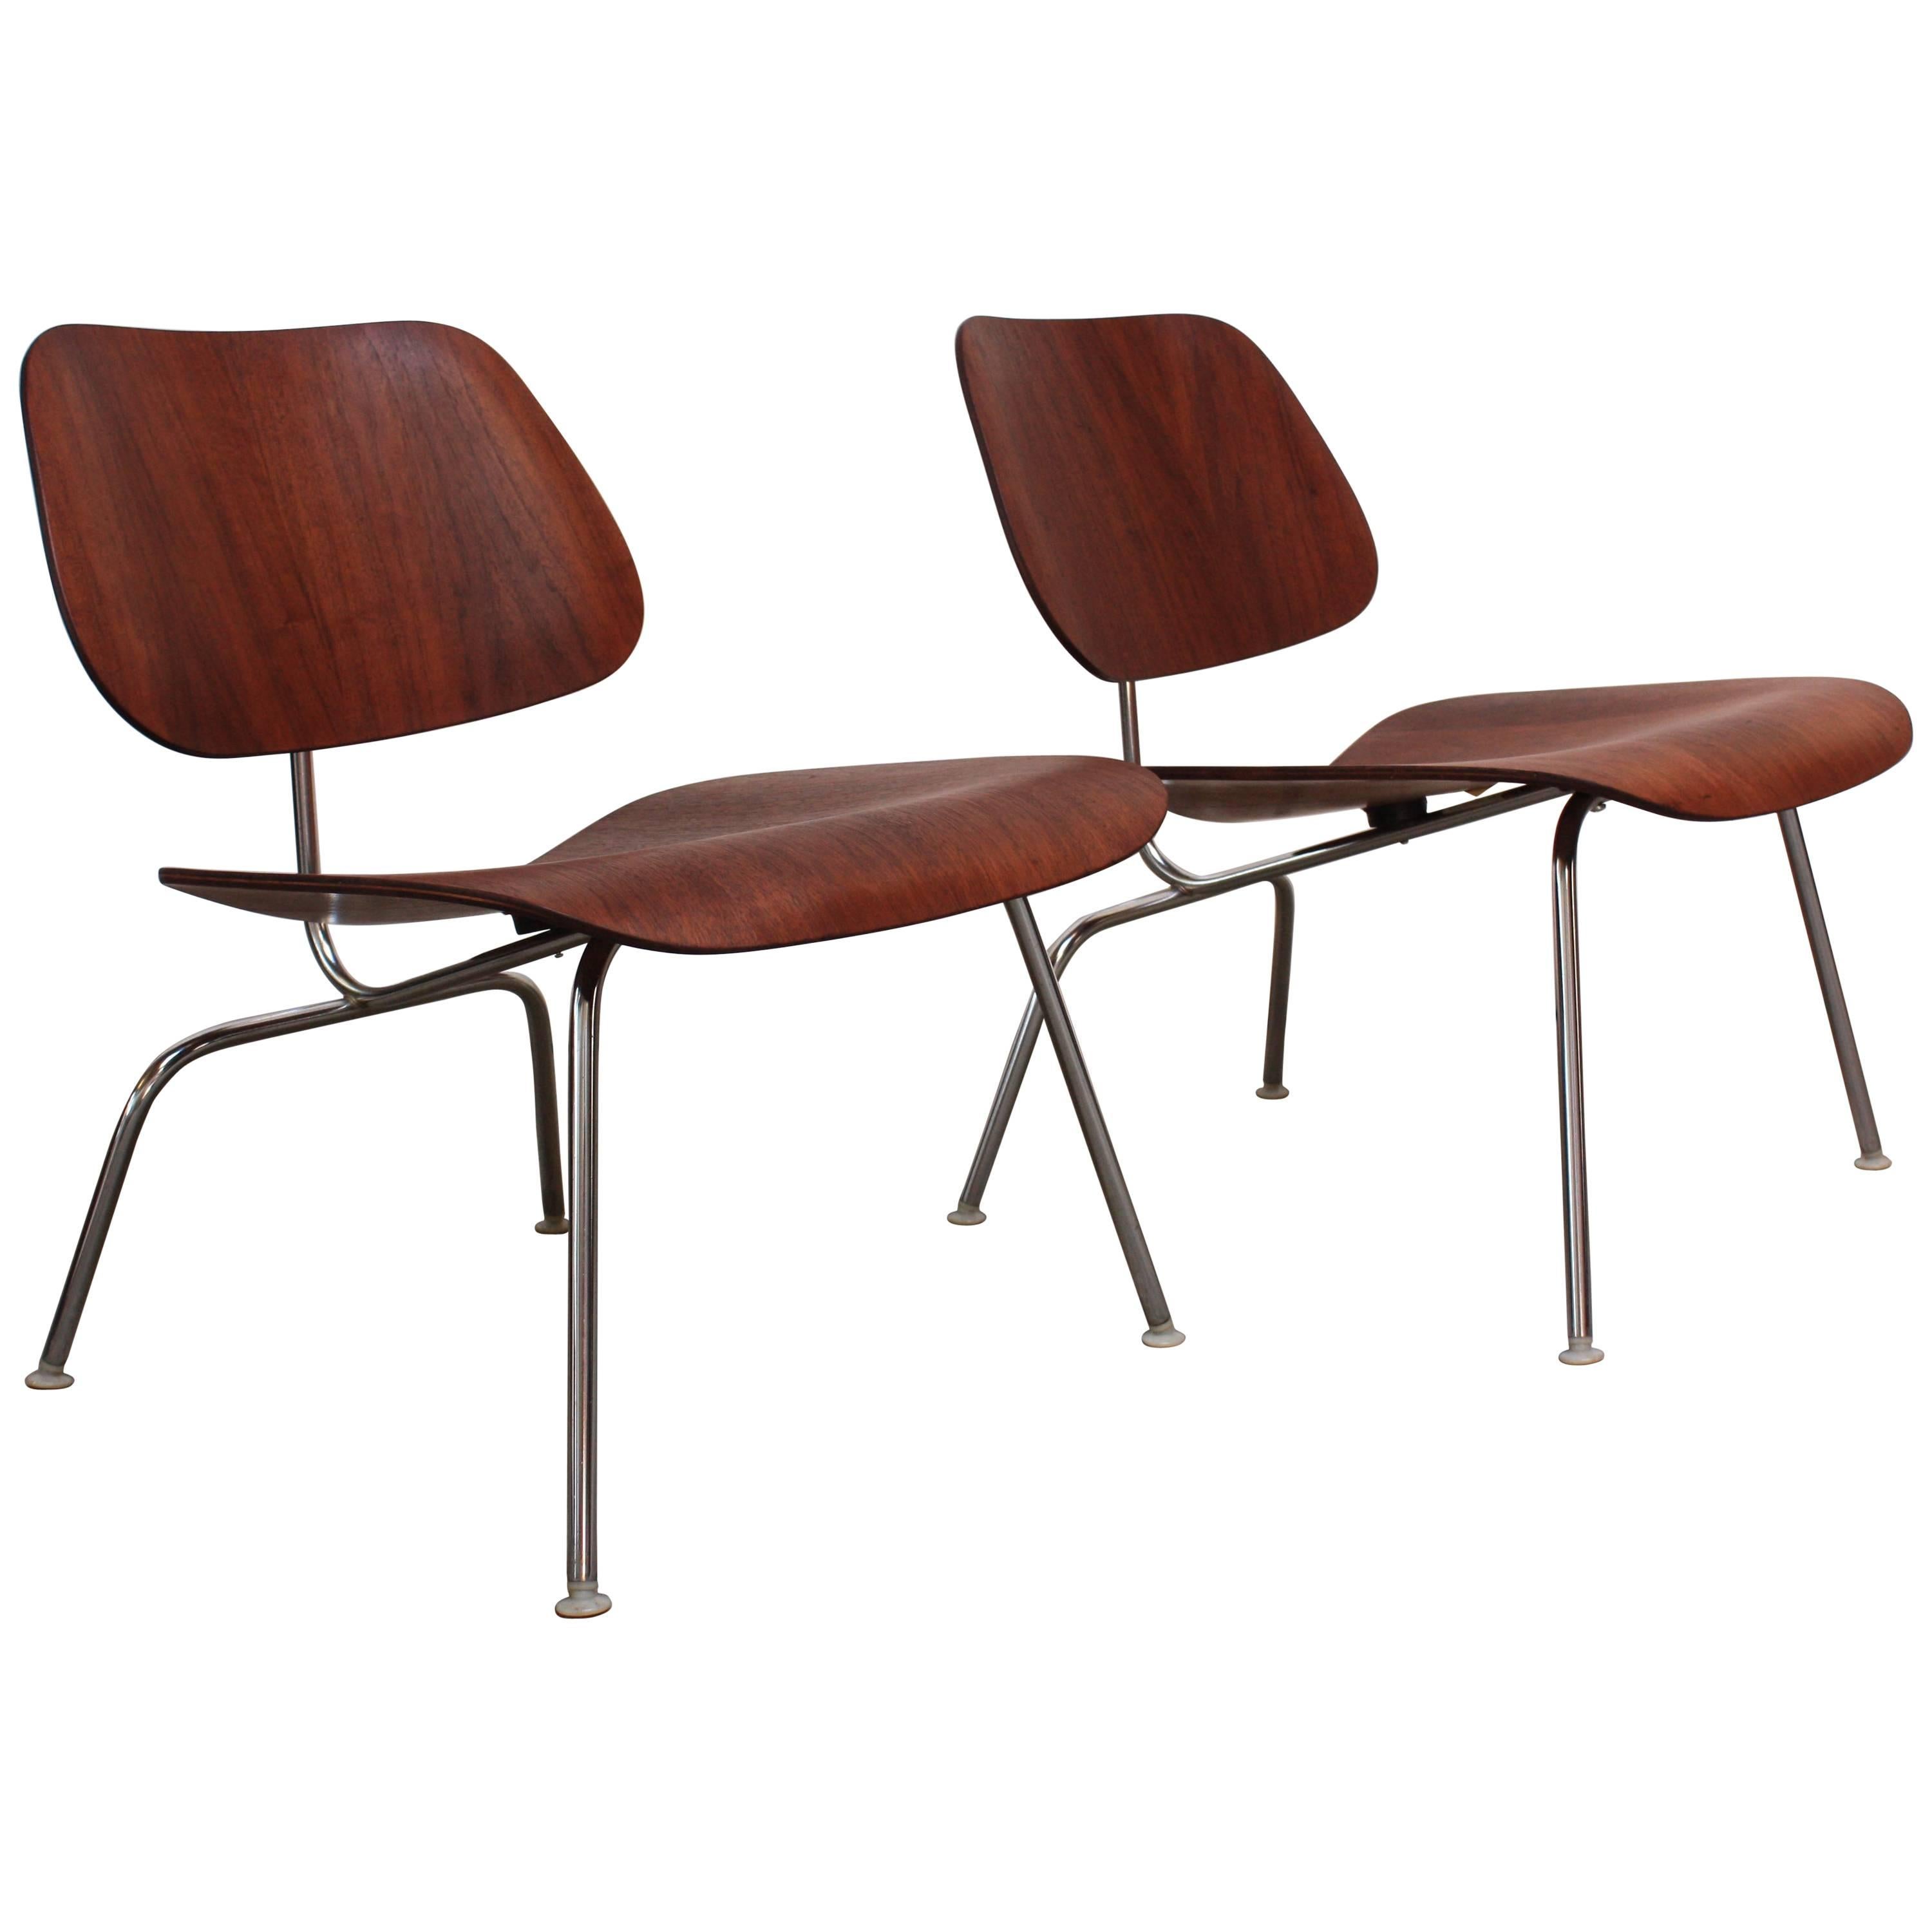 Pair of Eames for Herman Miller LCM Chairs in Walnut